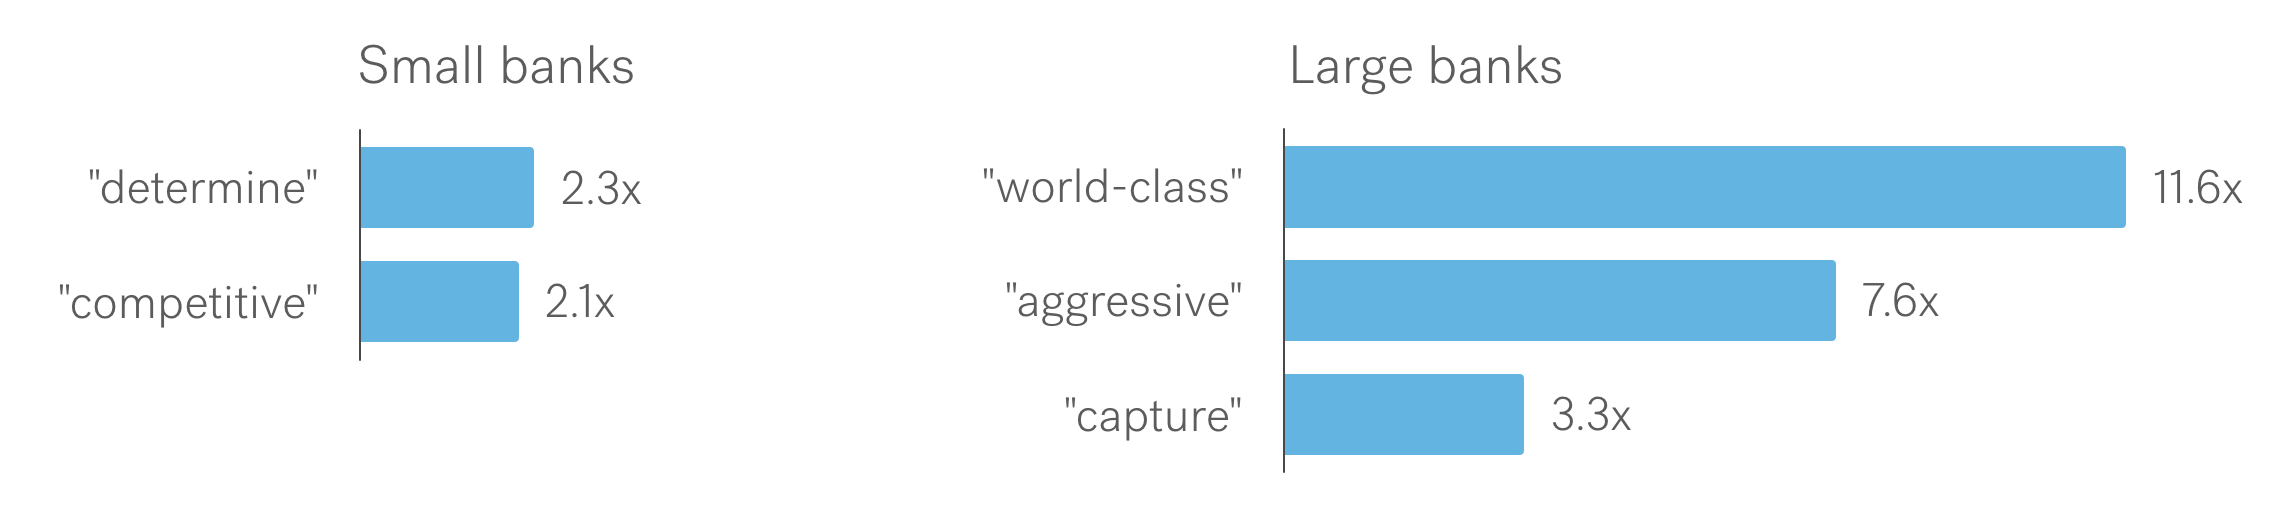 Bar chars showing which masculine phrases small vs large banks use more. Smalll banks use determine 2.3x more often and competitive 2.1x. Large banks use world-class 11.6 times more often, aggressive 7.6x, and capture 3.3x